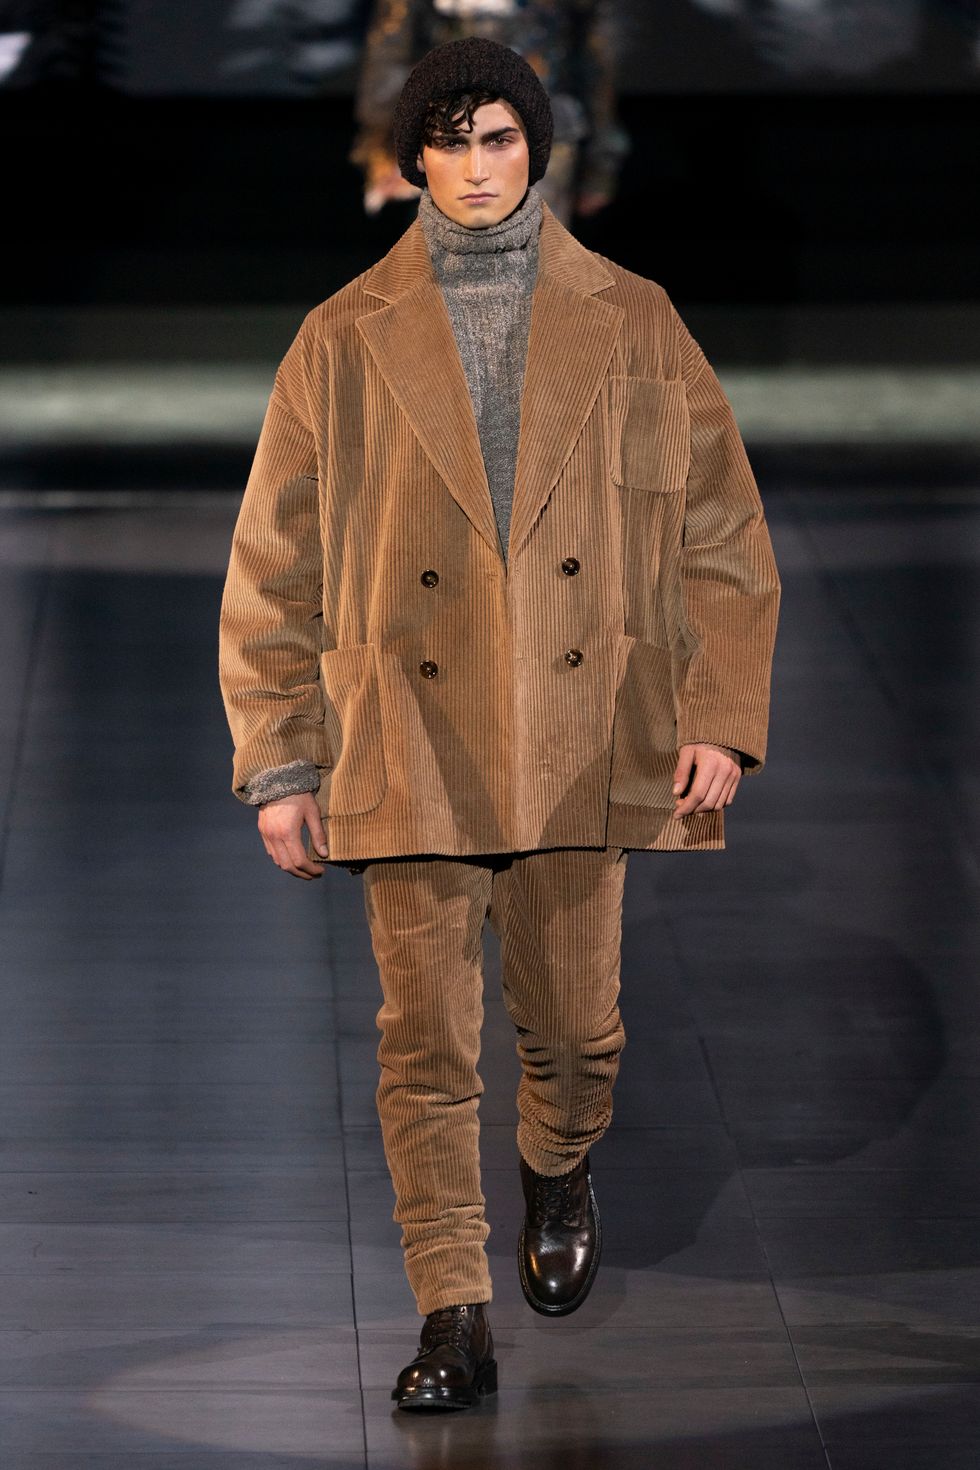 10 Top Fall 2020 Trends From the Men's Collections - PAPER